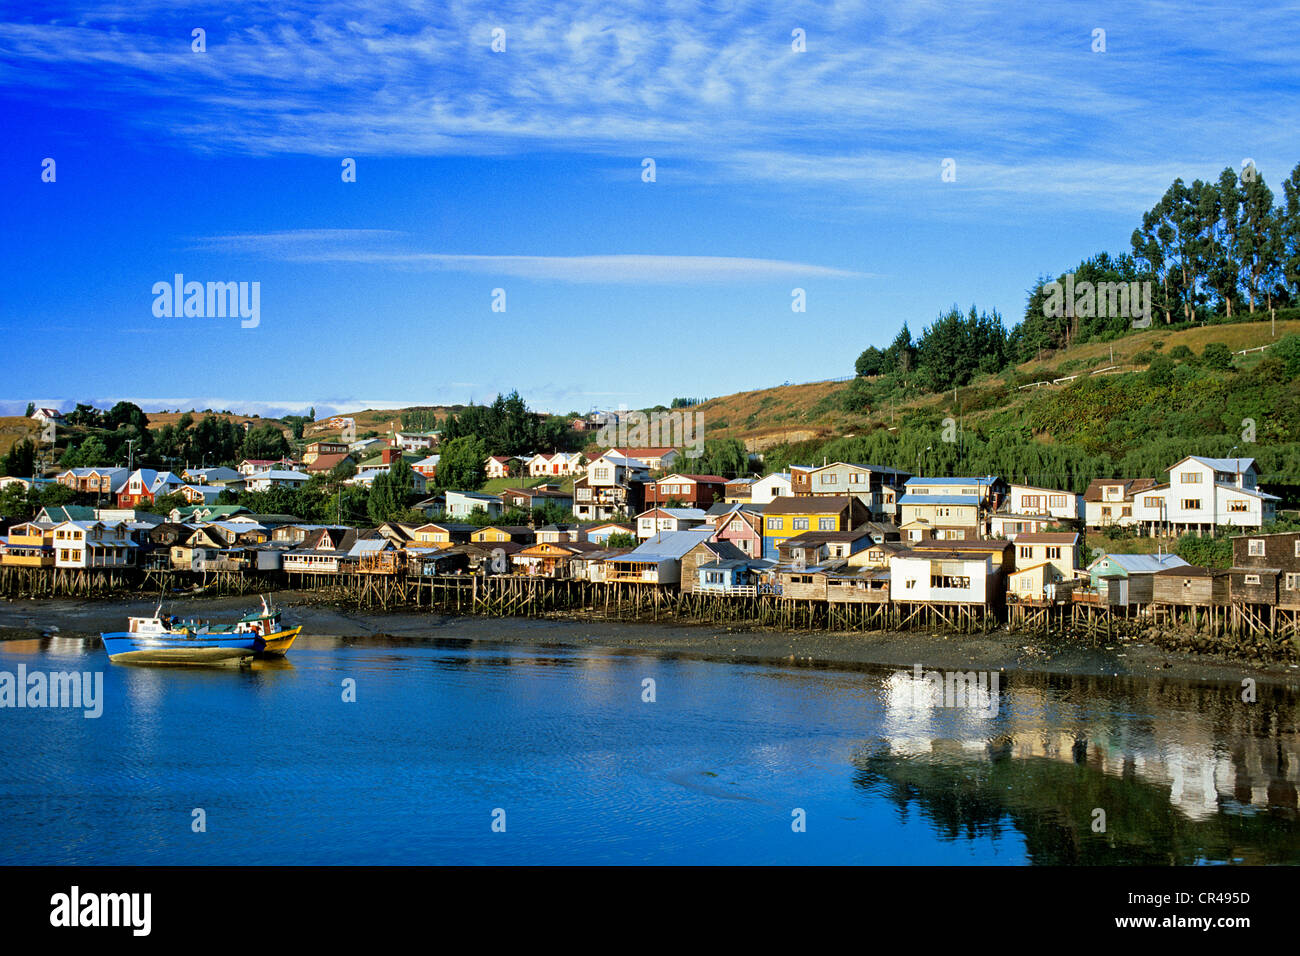 Chile, Los Lagos region, Chiloe Province, Chiloe Island, Castro, the palafitos (houses on Stilts) of the fishermen's districts Stock Photo